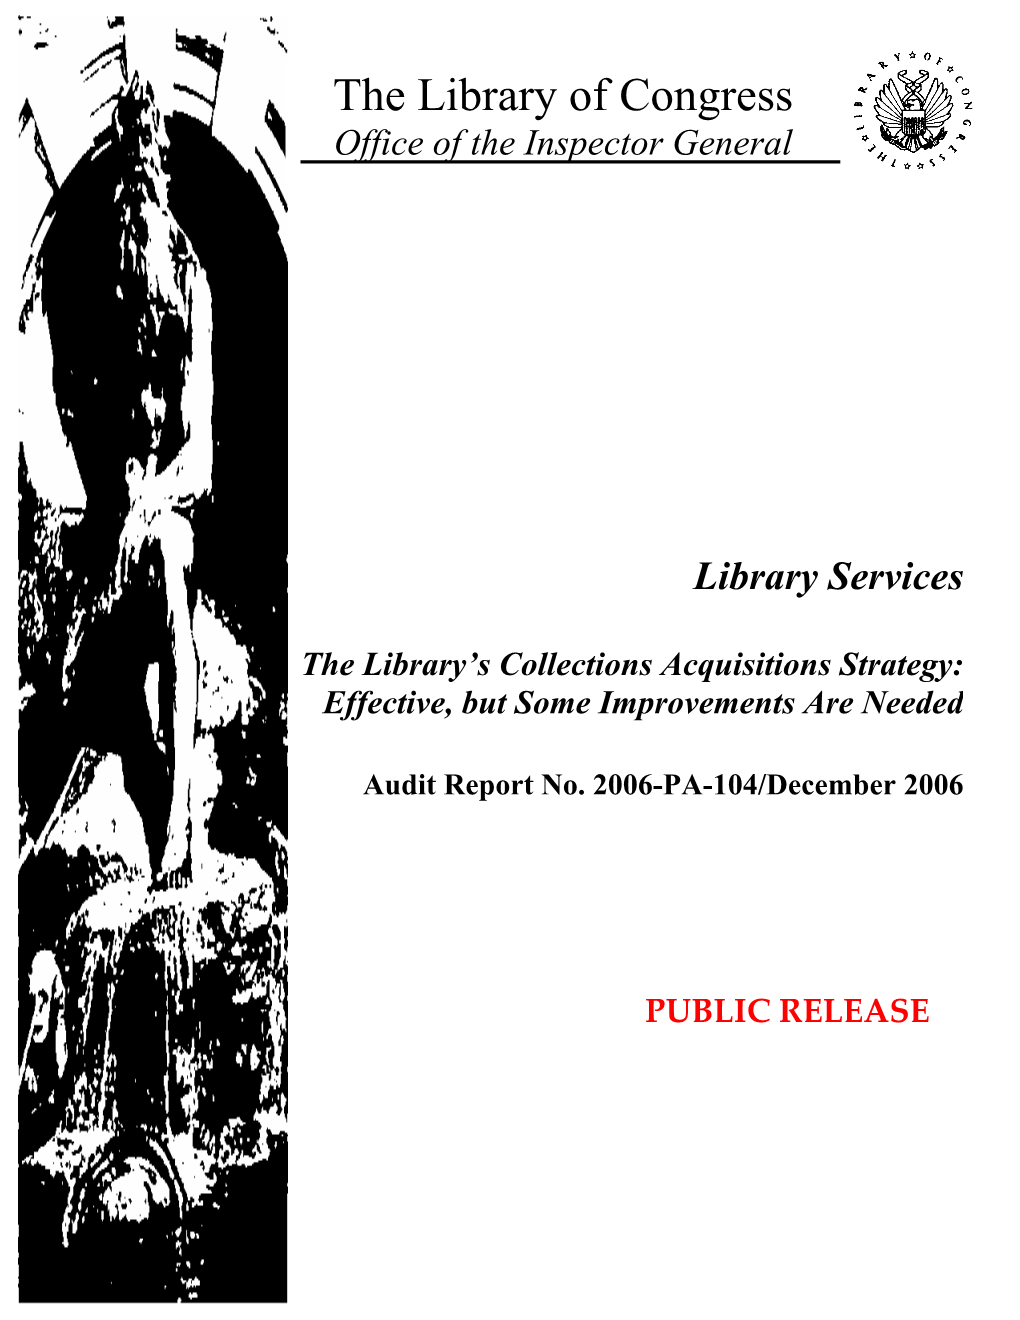 The Library's Collections Acquisition Strategy